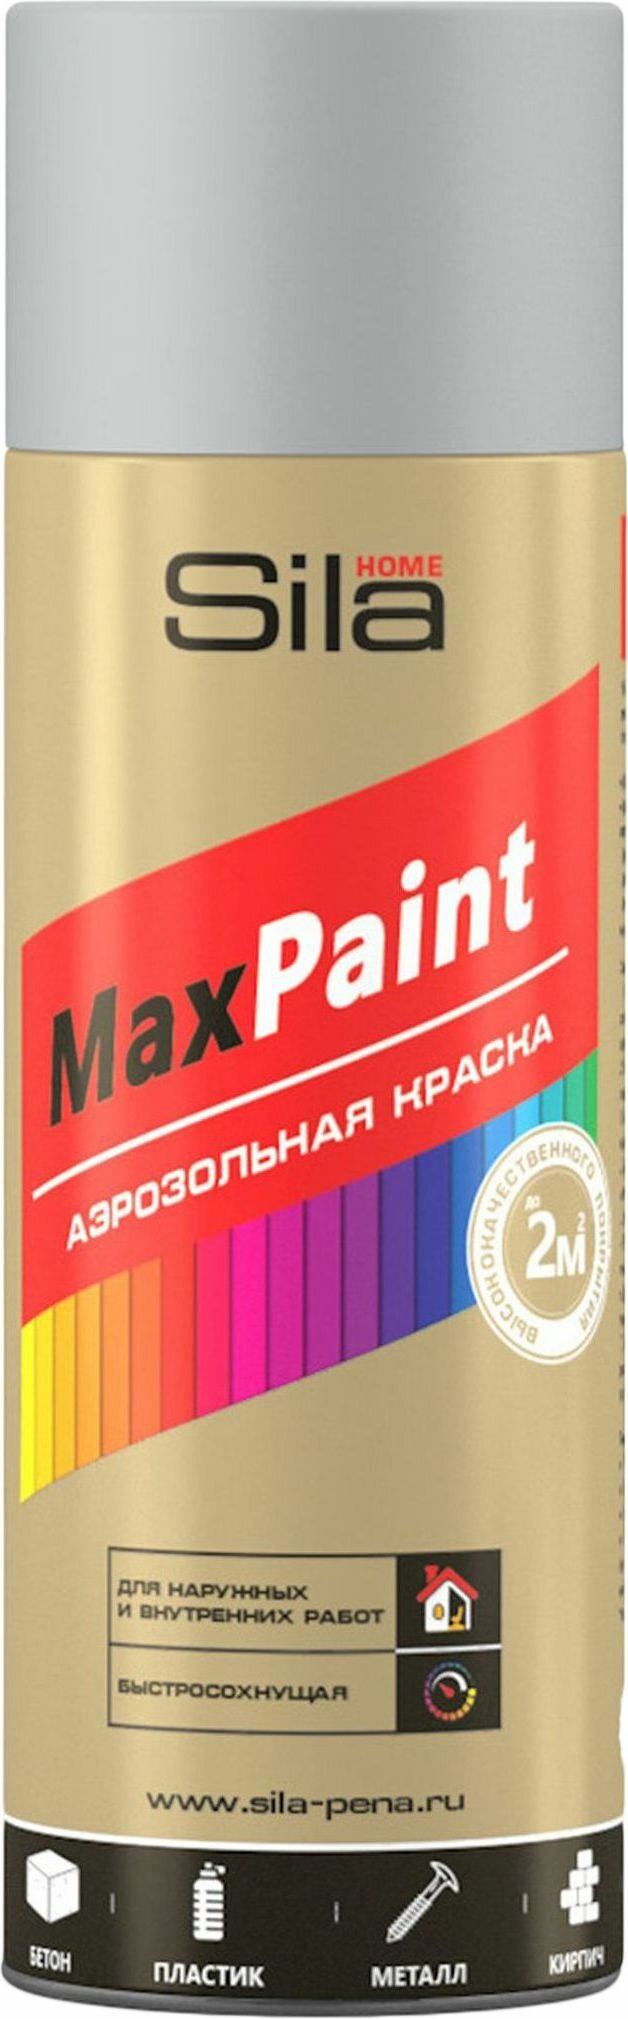   Sila Home Max Paint - 0,52 